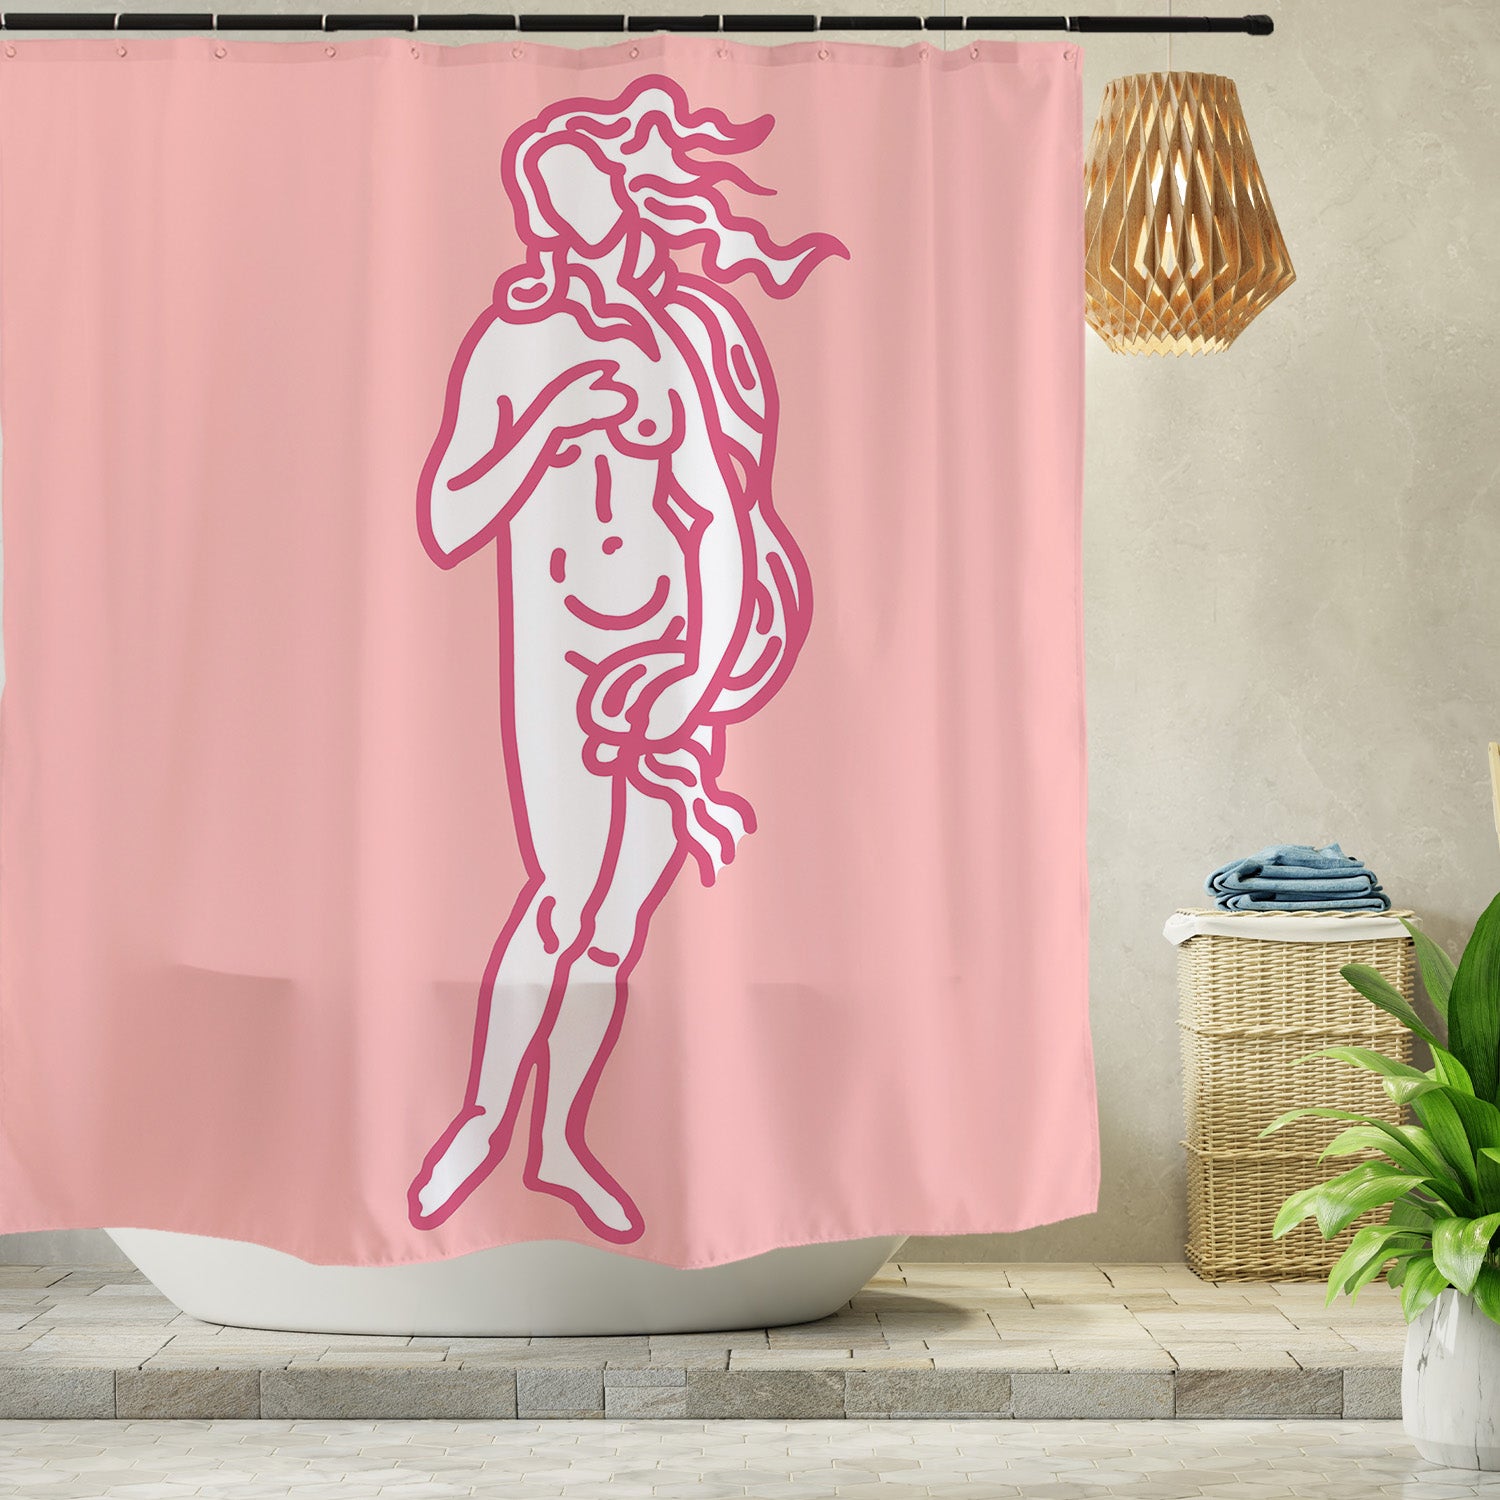 Feblilac Venus Simple Strokes Shower Curtain with Hooks